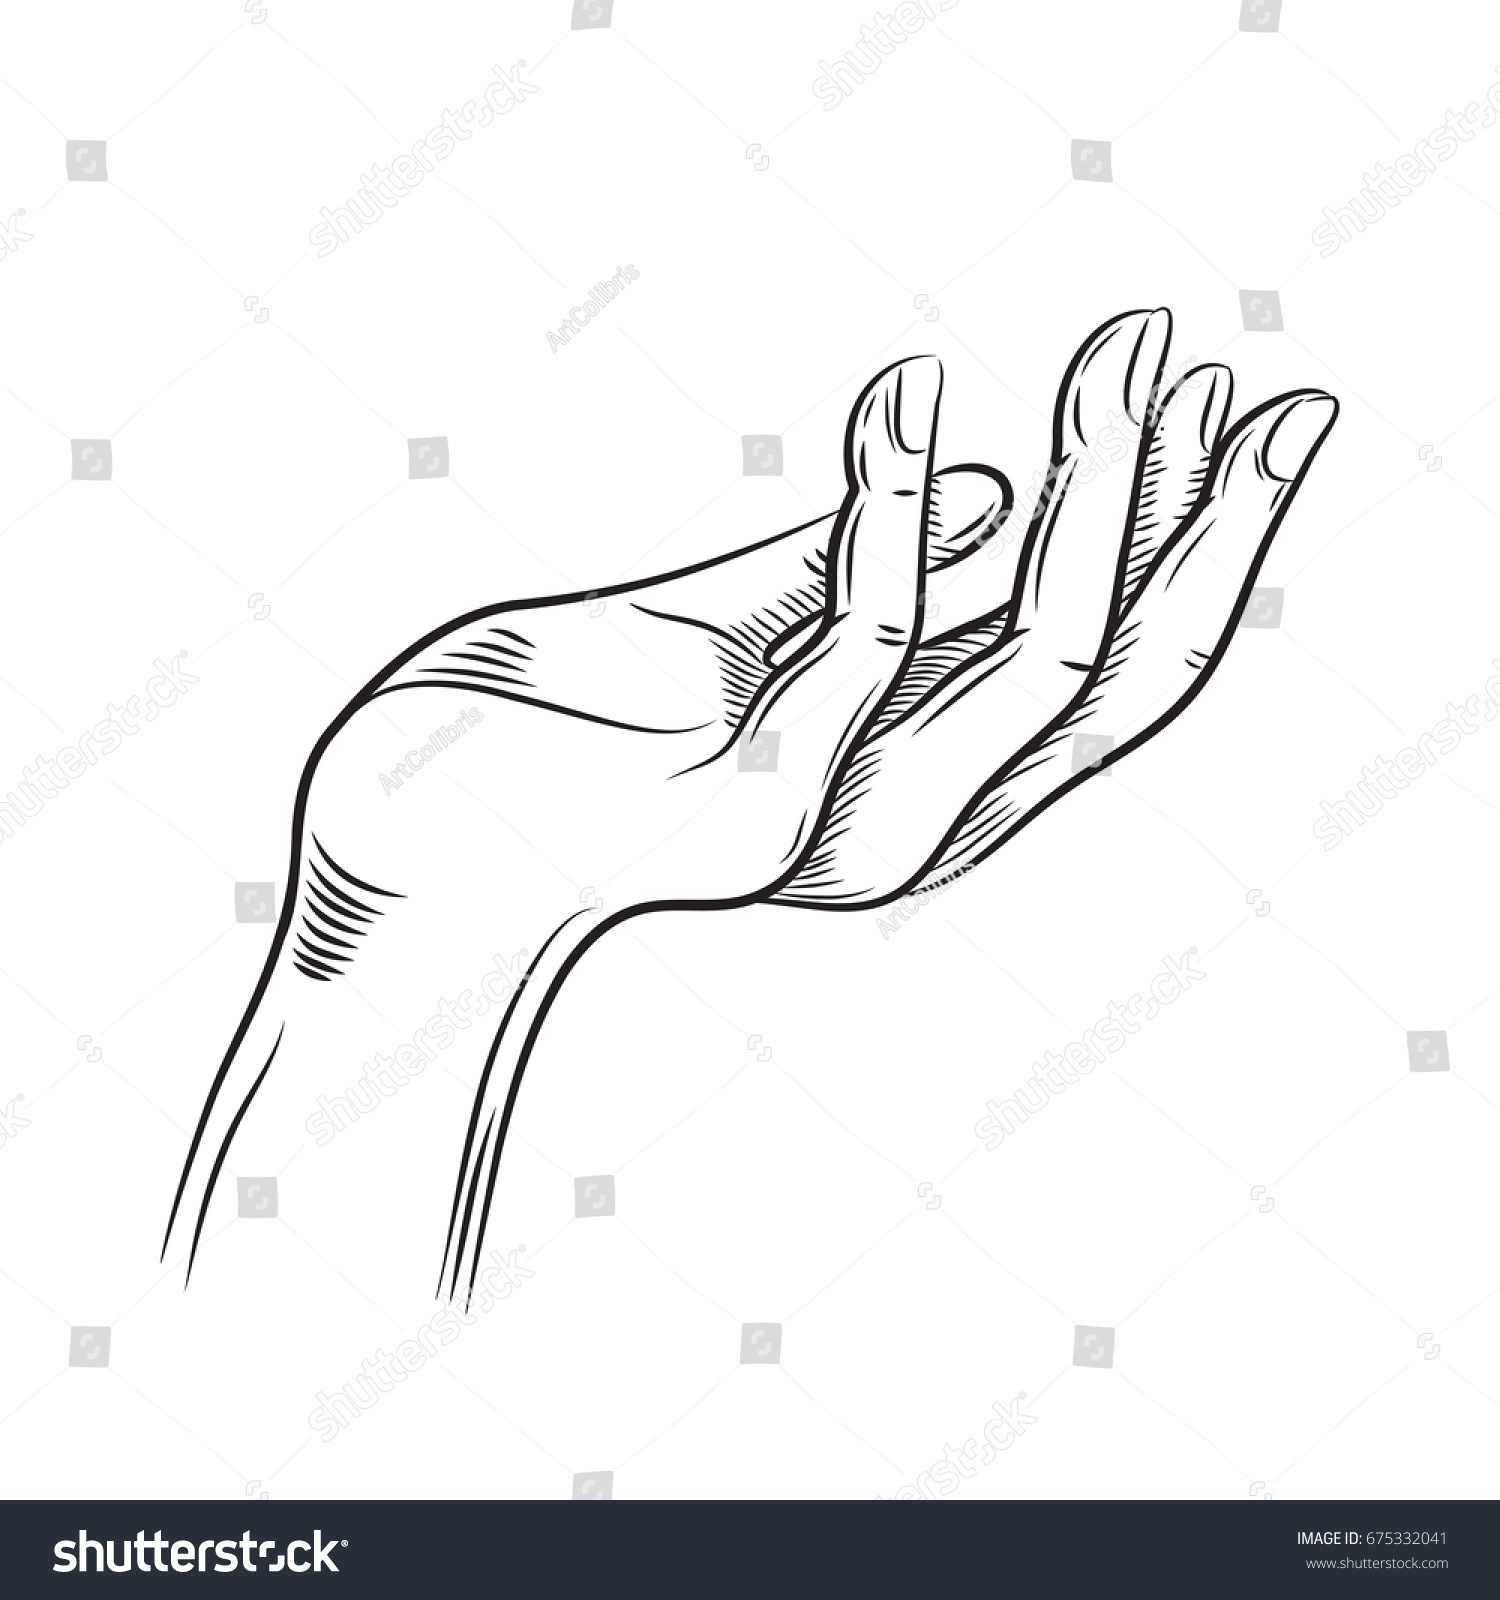 How To Draw Hands Holding Something Up : Hands Holding Pen Writing